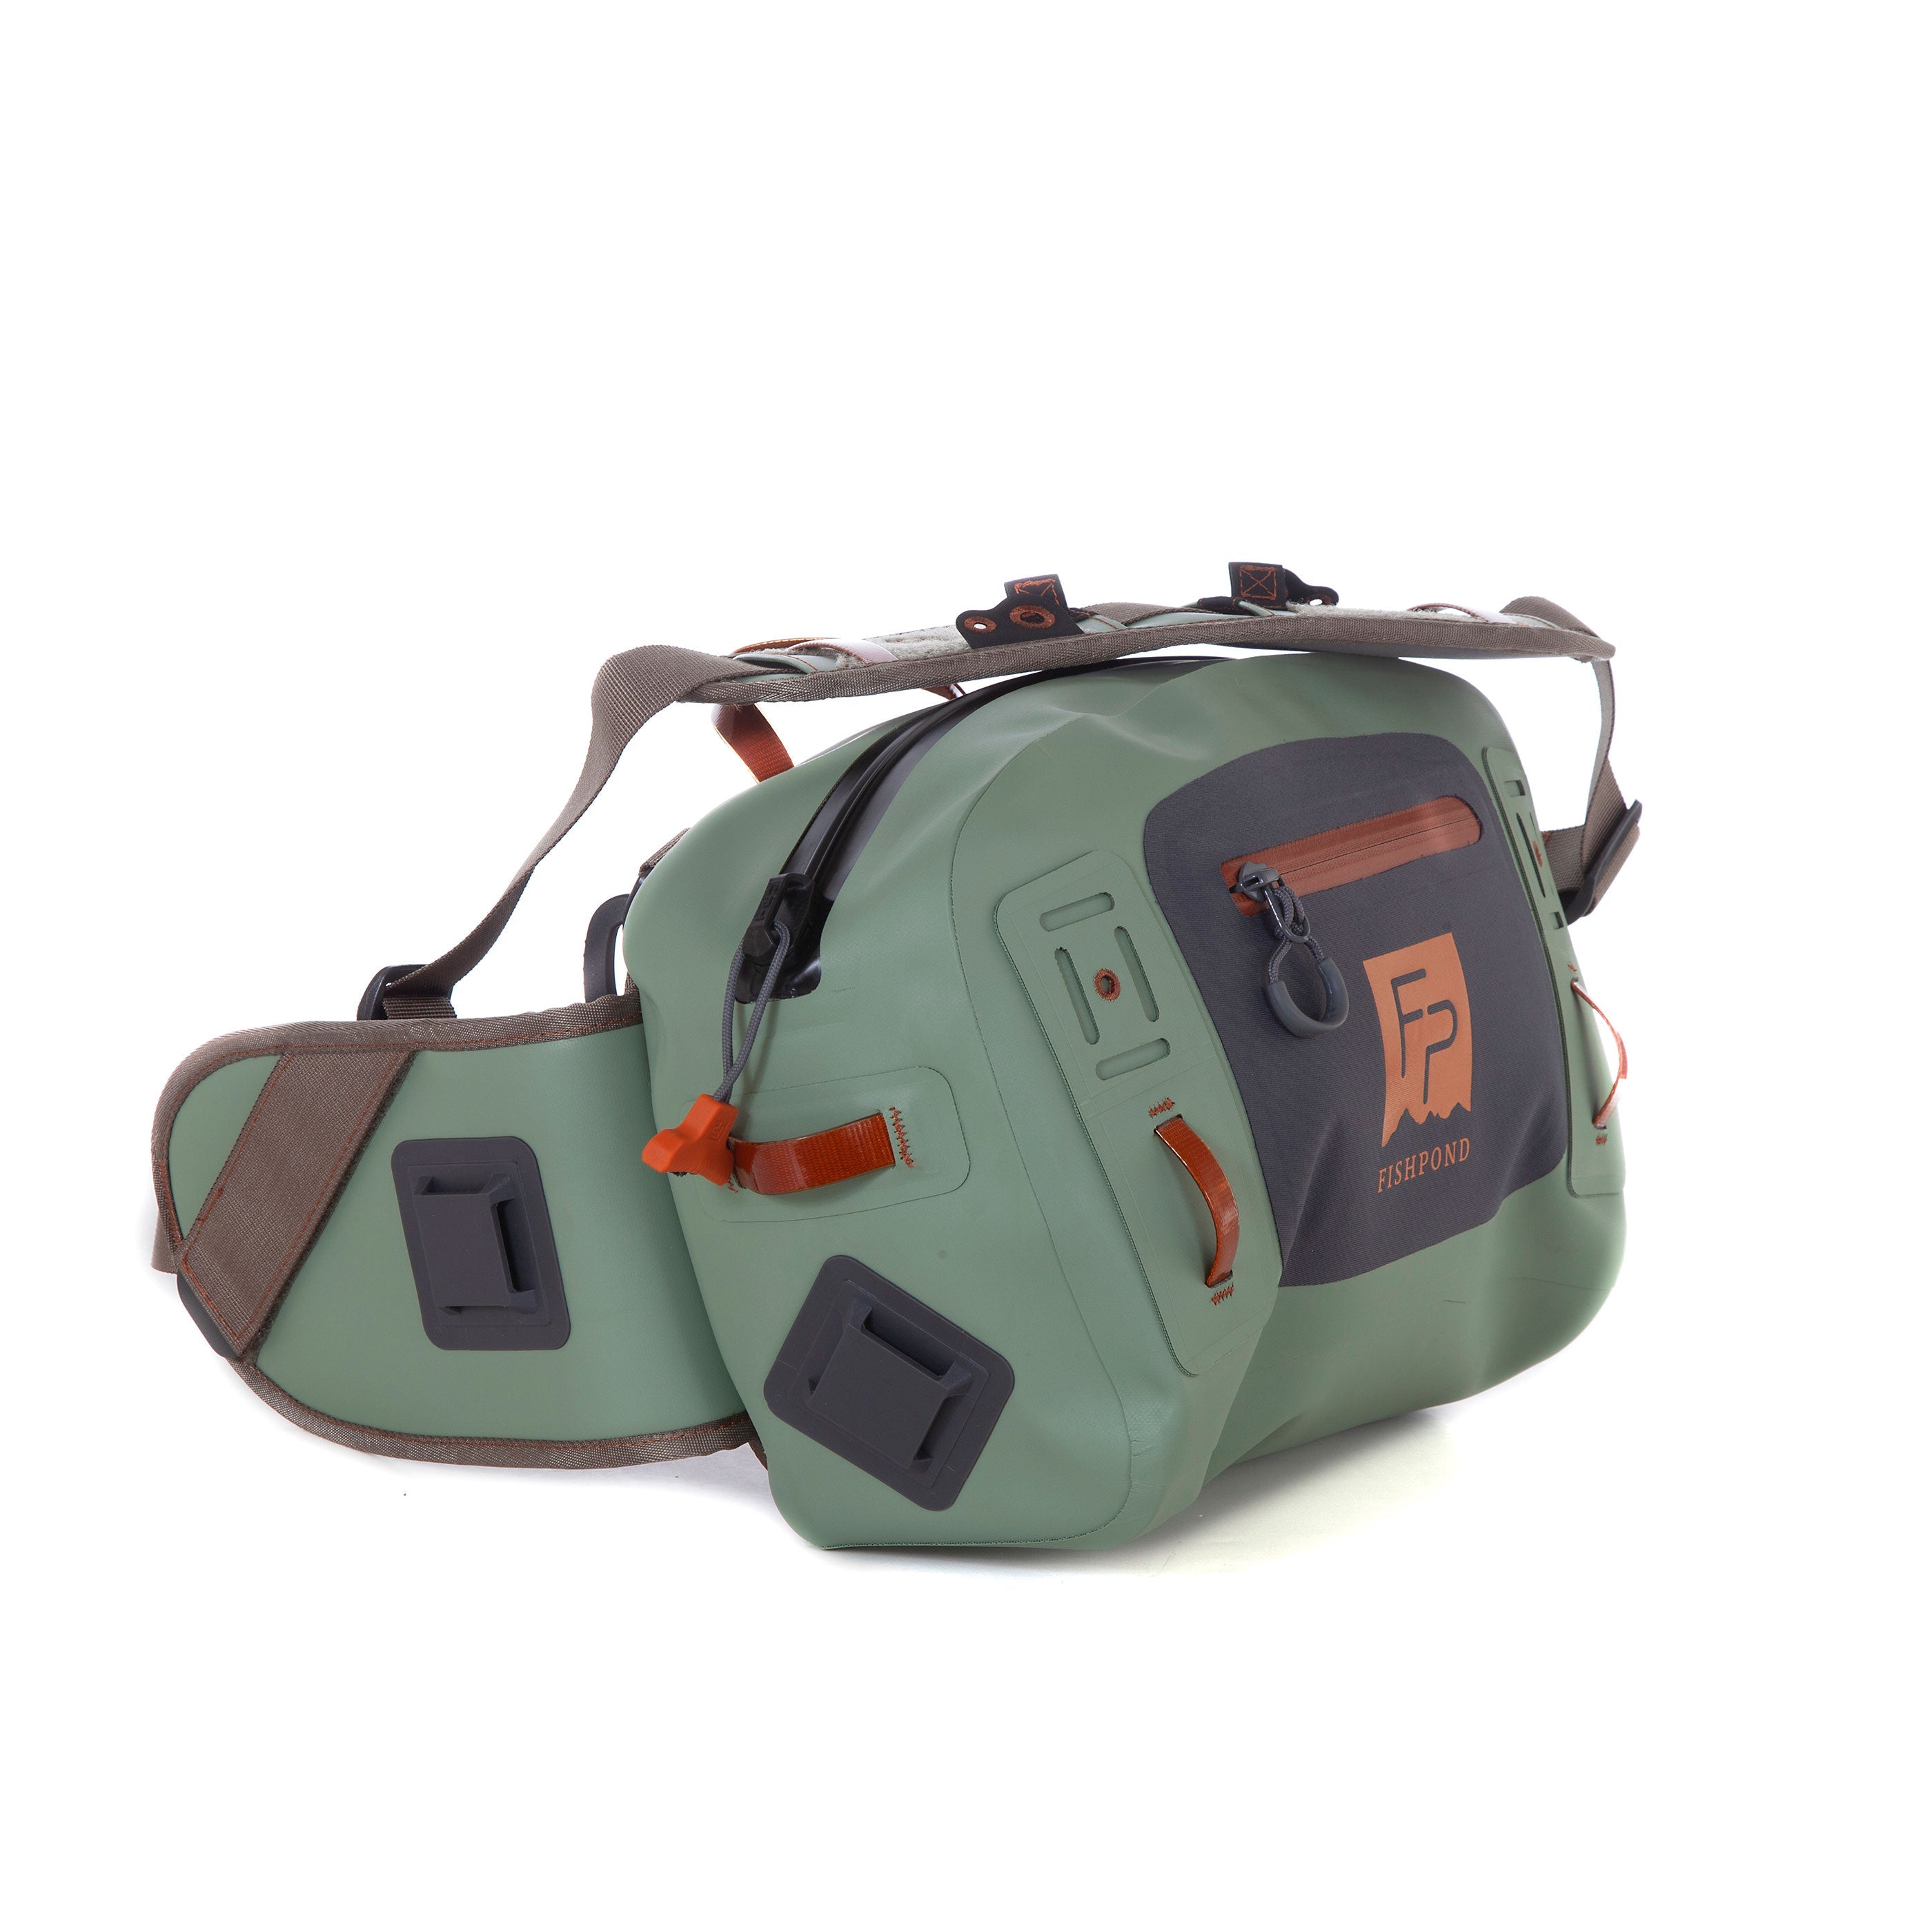 Fishpond Thunderhead Submersible Chest Pack – Out Fly Fishing